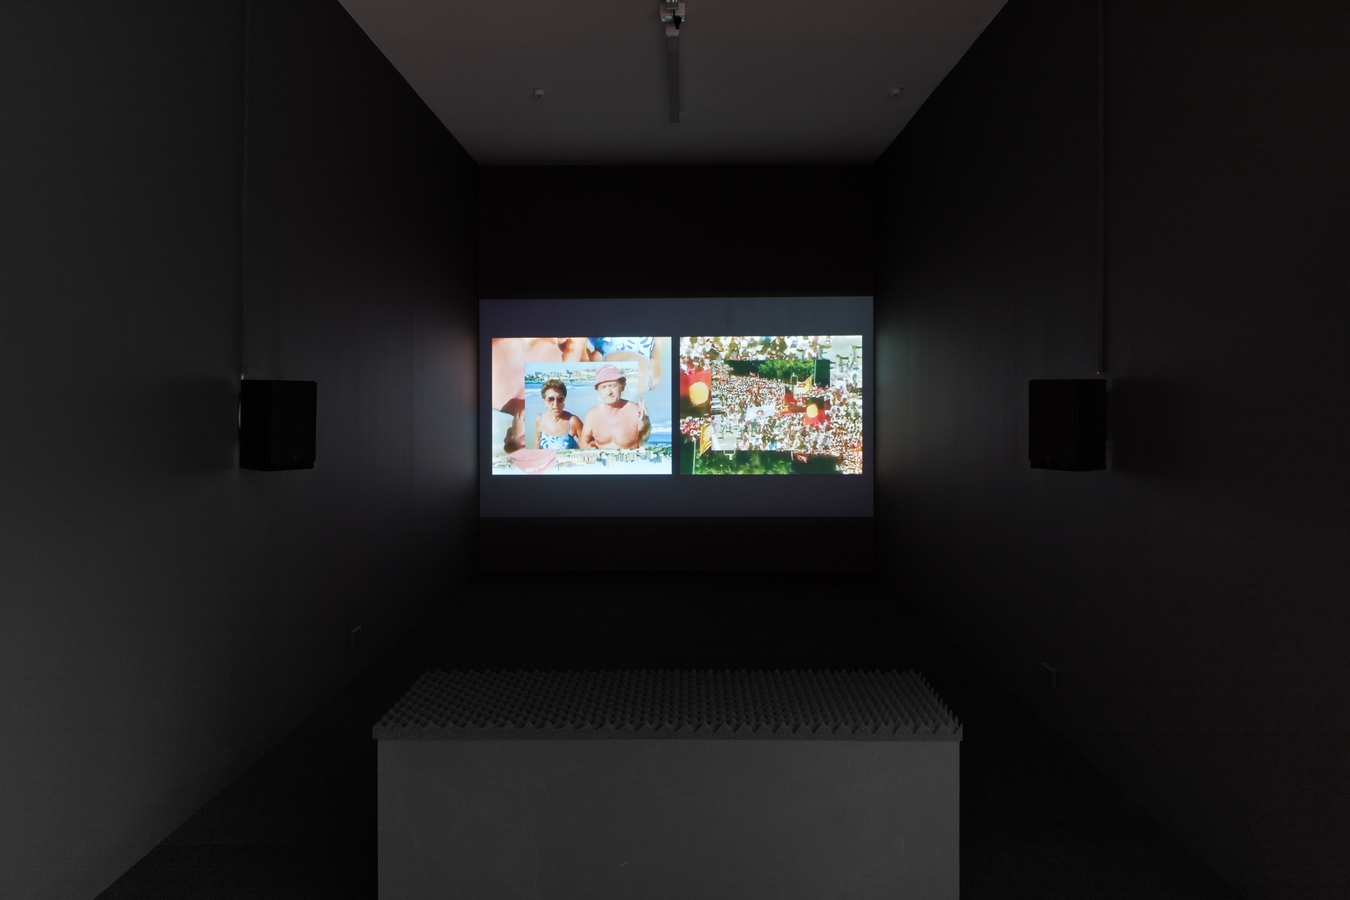 Image: Dean Cross, Pas de Deux (installation view), 2019. Part of Programme 2 curated by Michelle Wang. Photo: Janneth Gil.